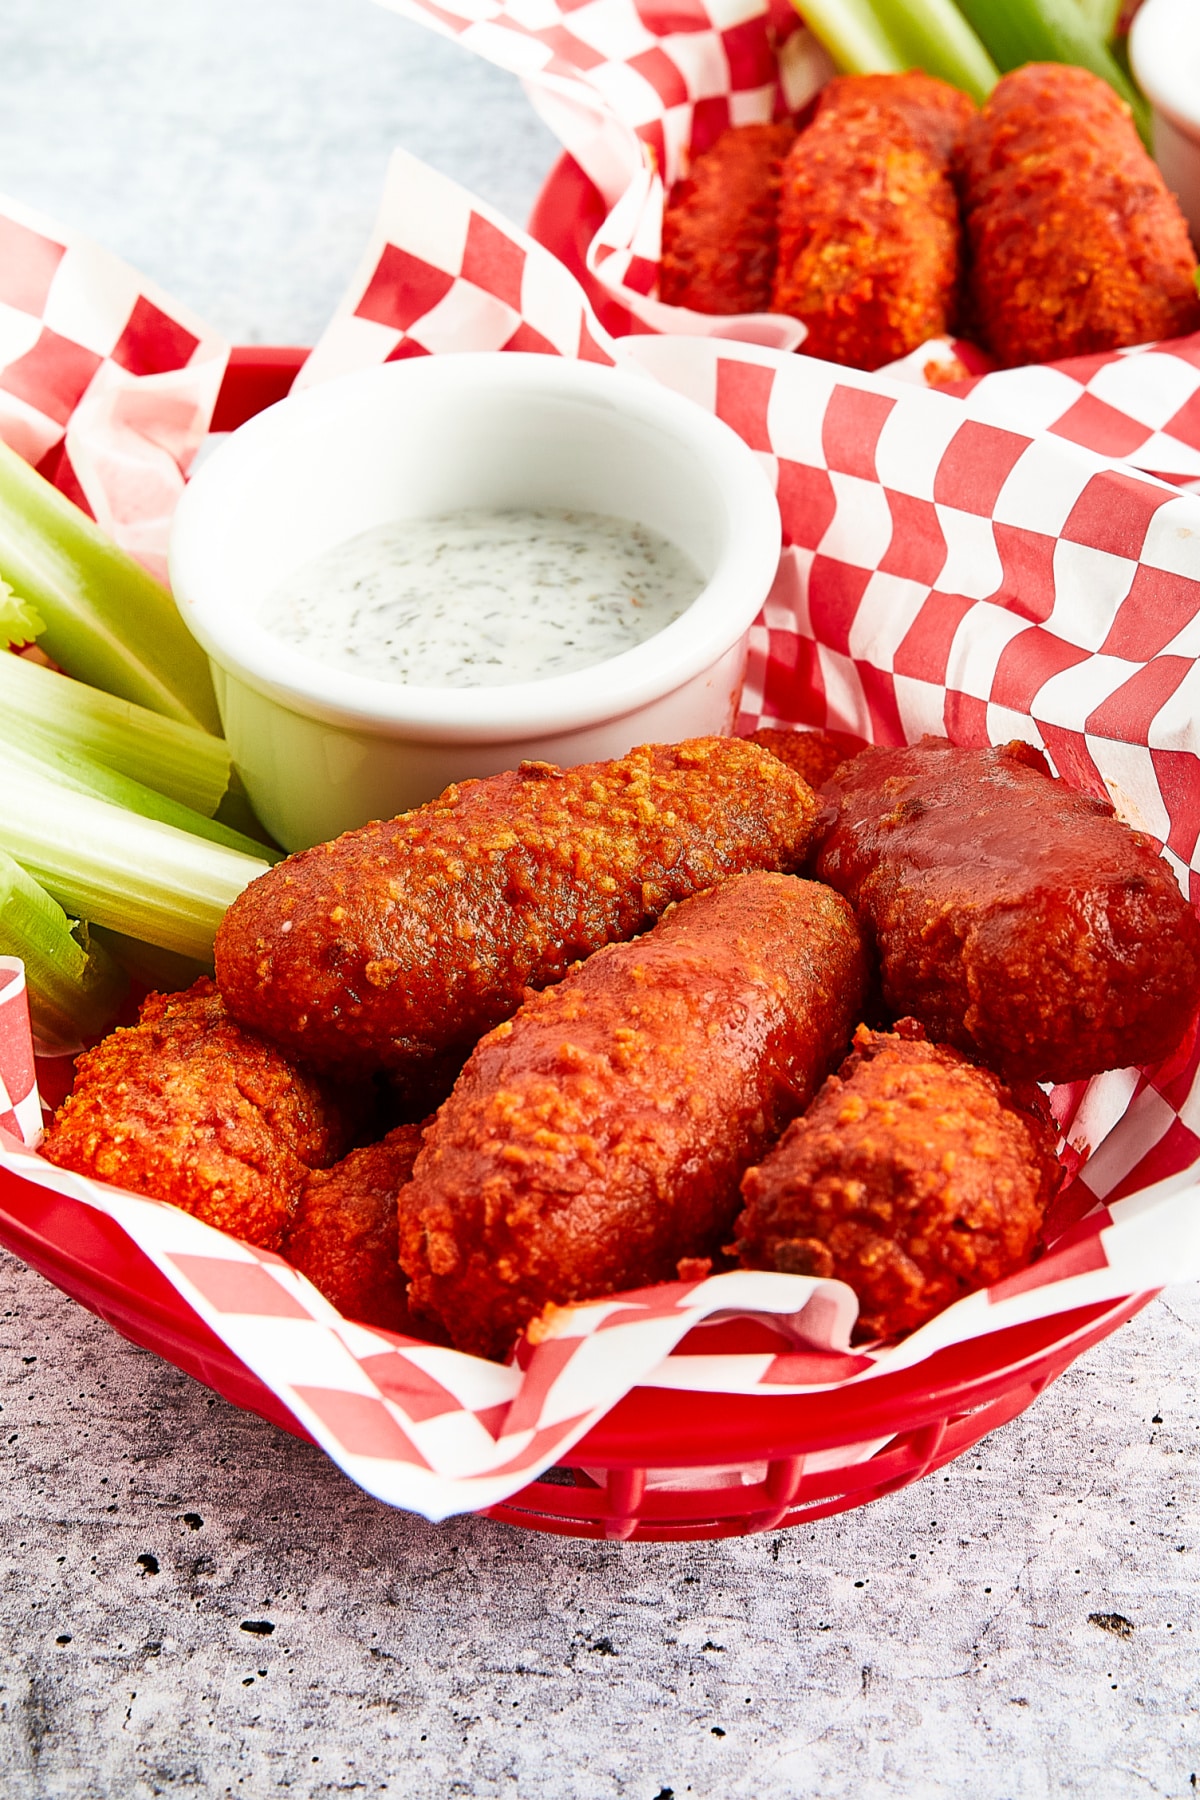 Bright orange vegan buffalo wings sit in a red plastic serving basket lined with red and white checkered paper. Celery sticks and a small white bowl of celery ranch are in the basket with the wings.